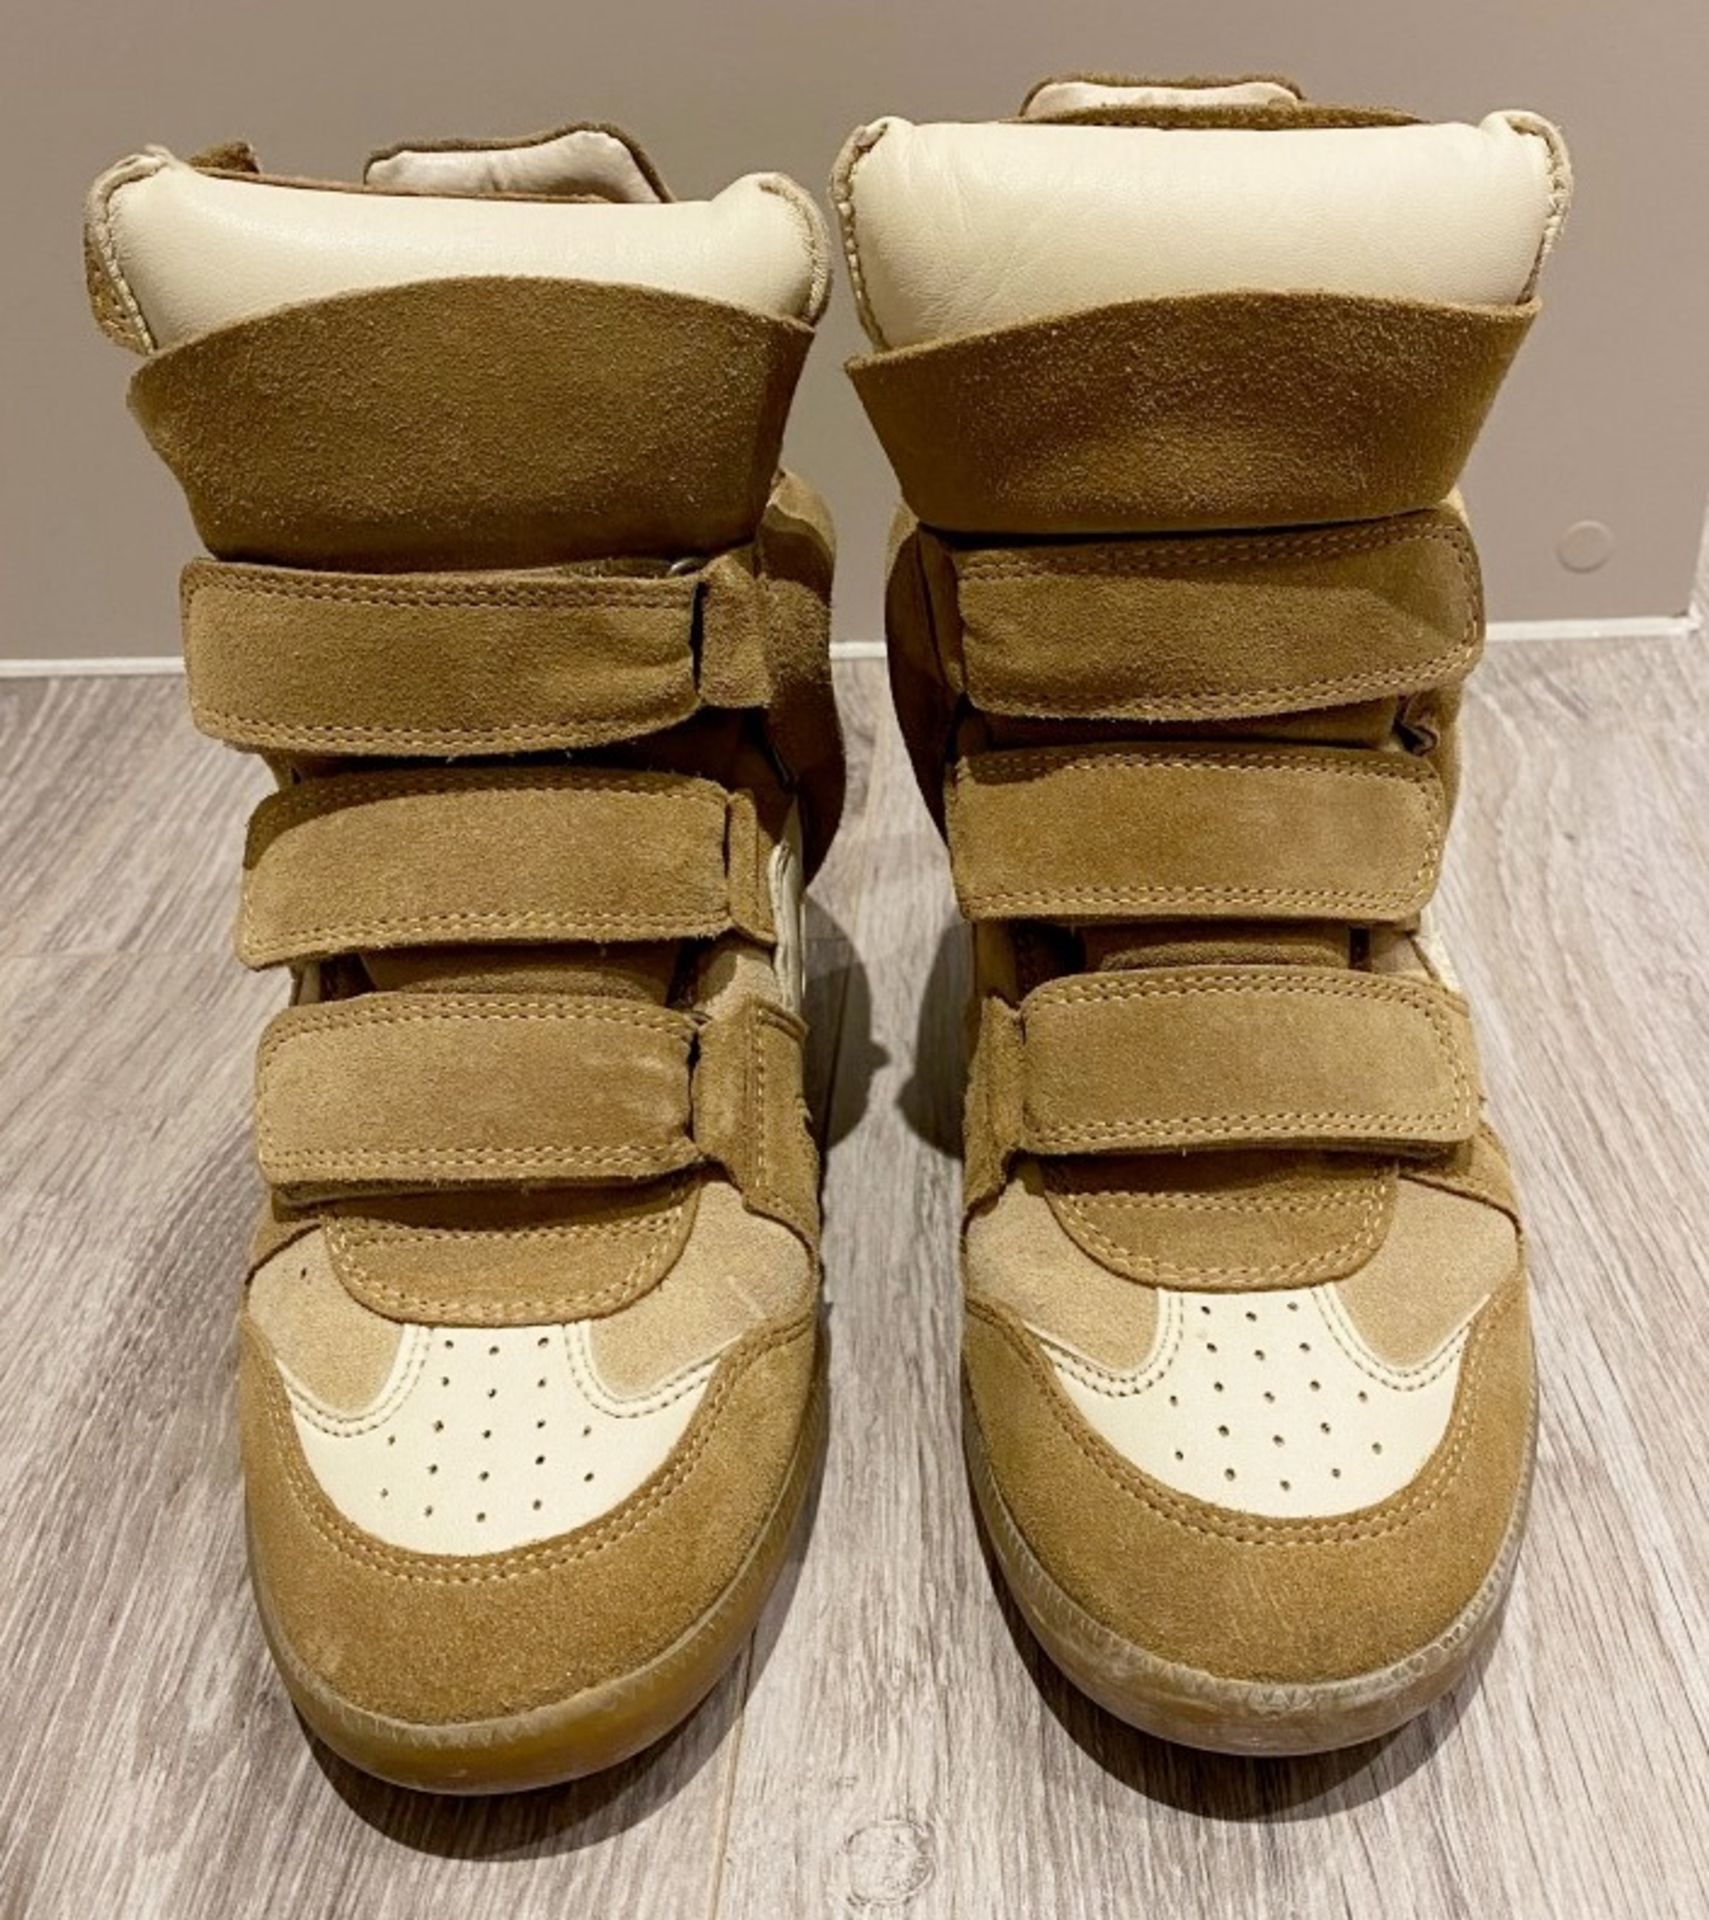 1 x Pair Of Genuine Isabel Marant Boots In Tan - Size: 36 - Preowned in Good Condition - Ref: LOT40 - Image 4 of 4